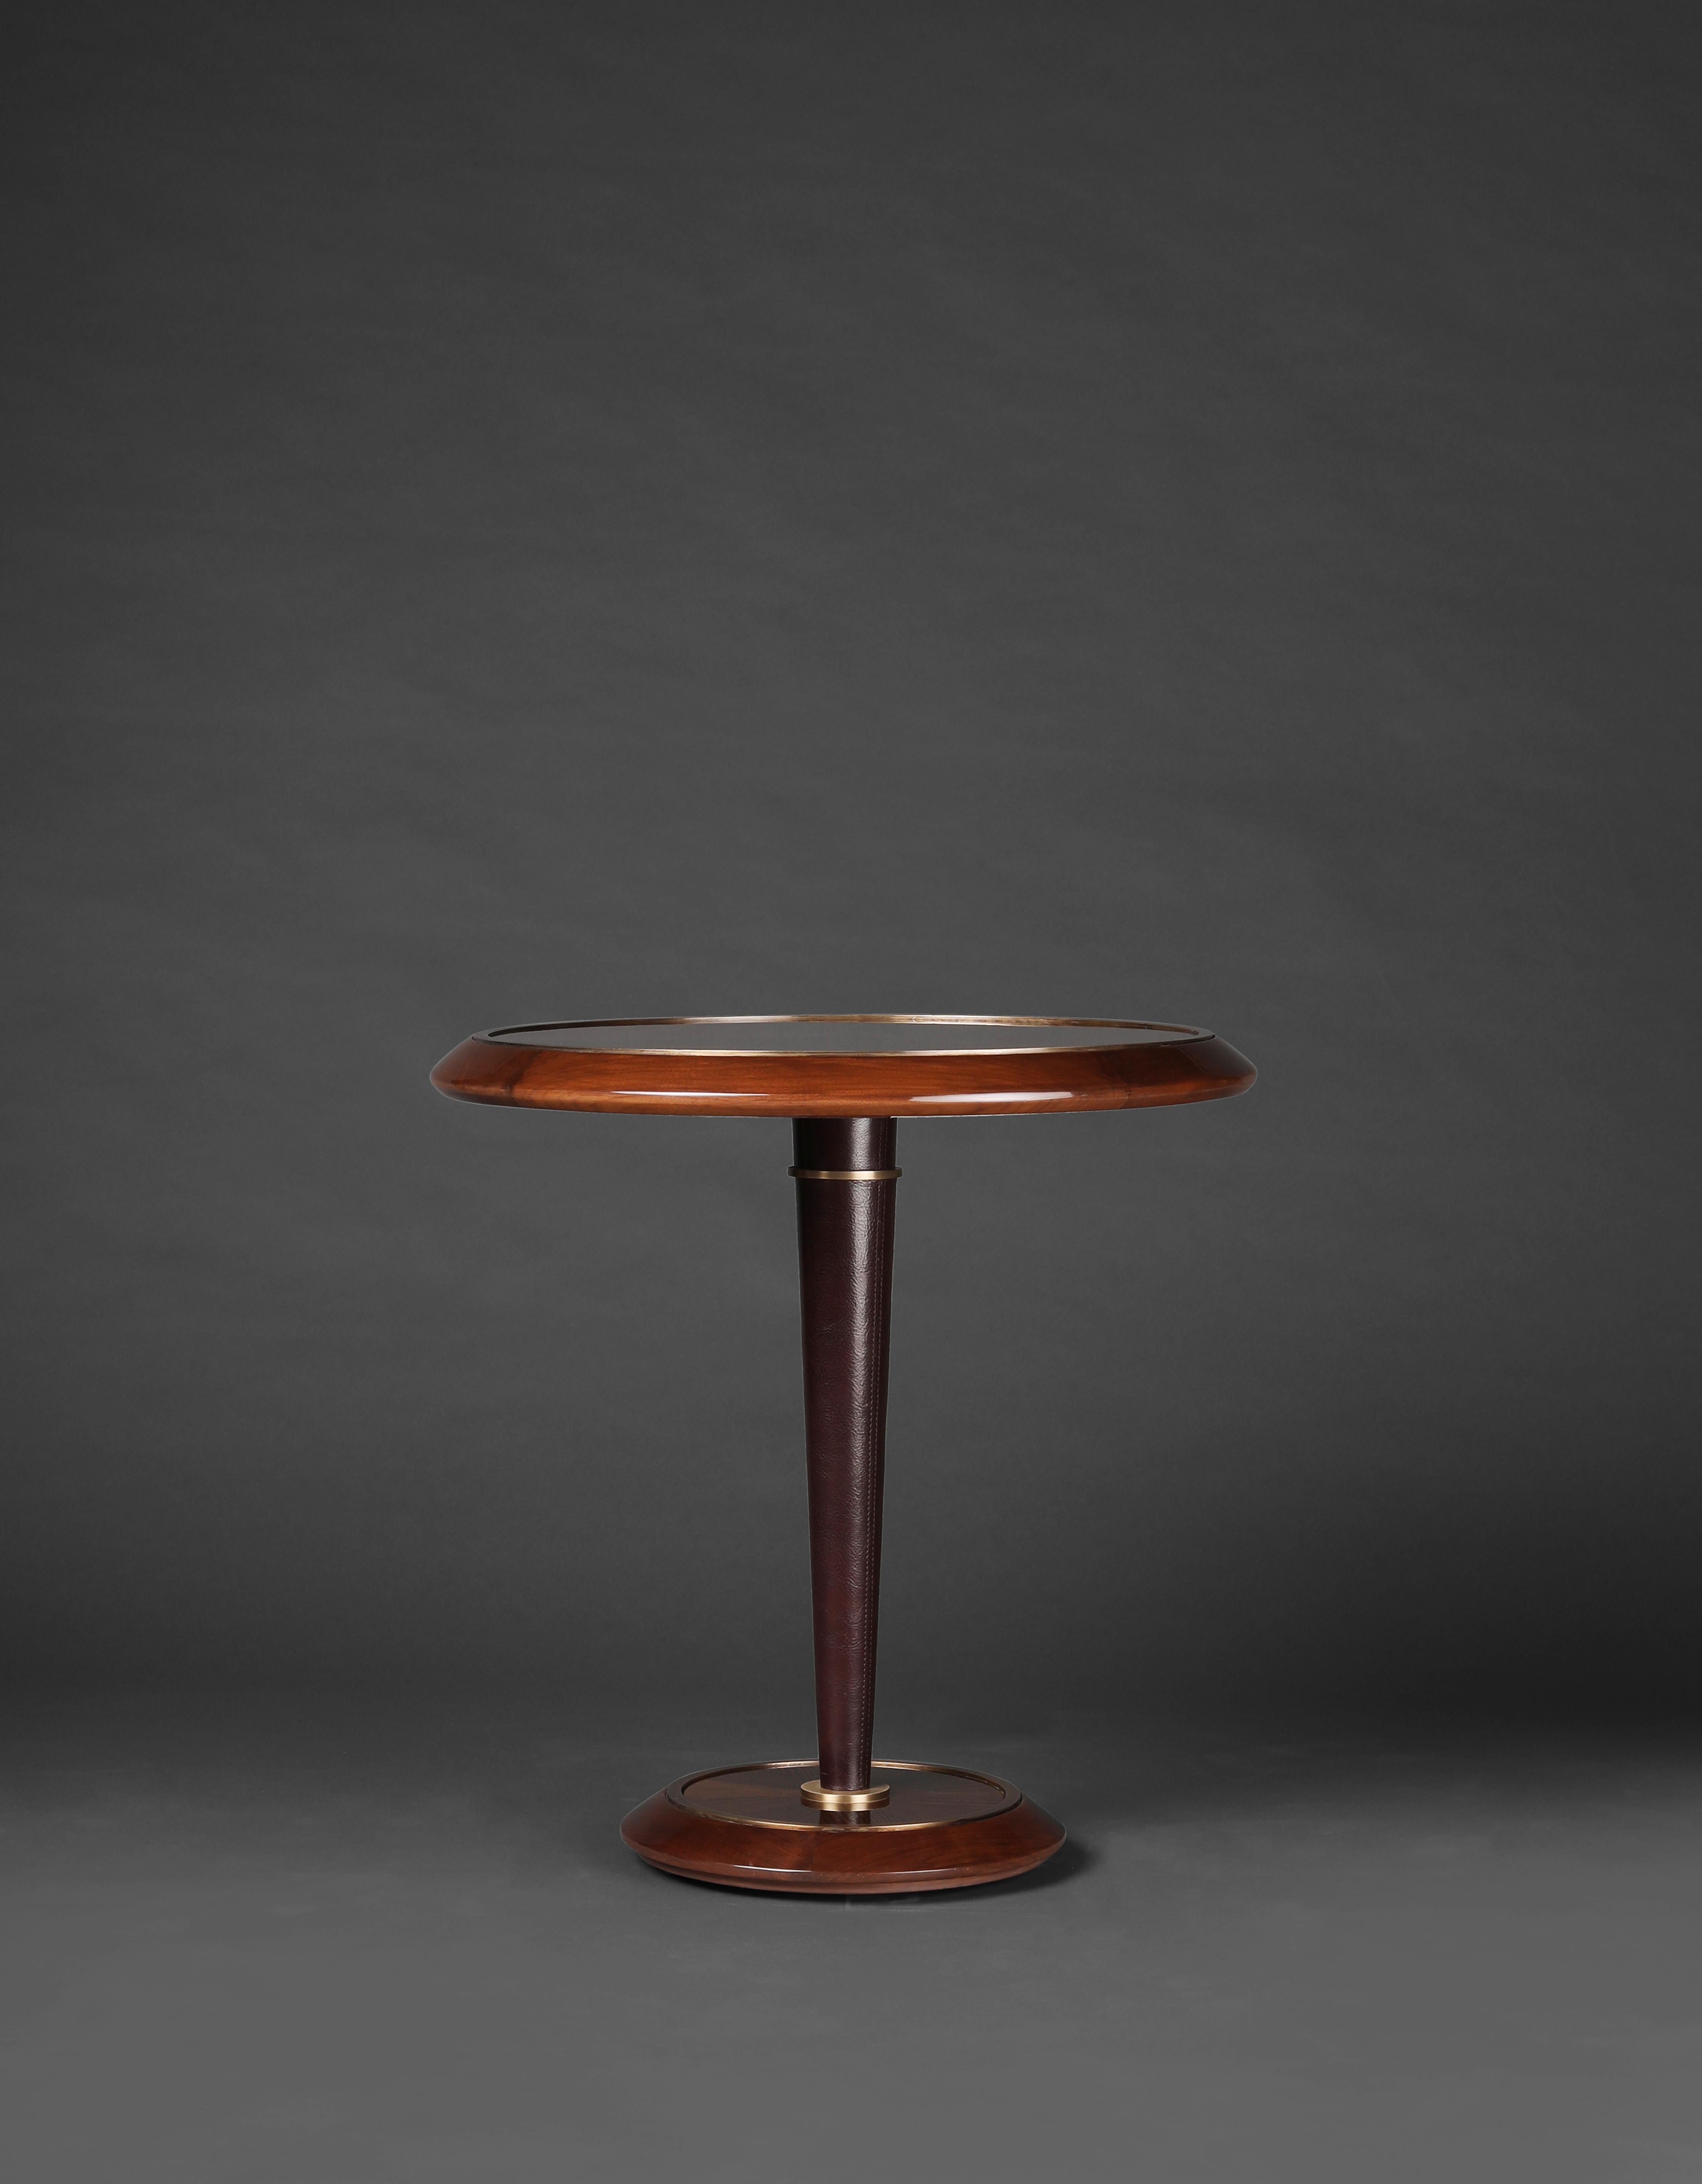 Leather pedestal leg sura side table by Madheke
Dimensions: Ø 55 x H 55.5 cm
Materials: Leather, veneer, metal

Marquetry set in a contemporary metal trim with a leather pedestal leg.

Reflecting the finest in craftsmanship, innovation and